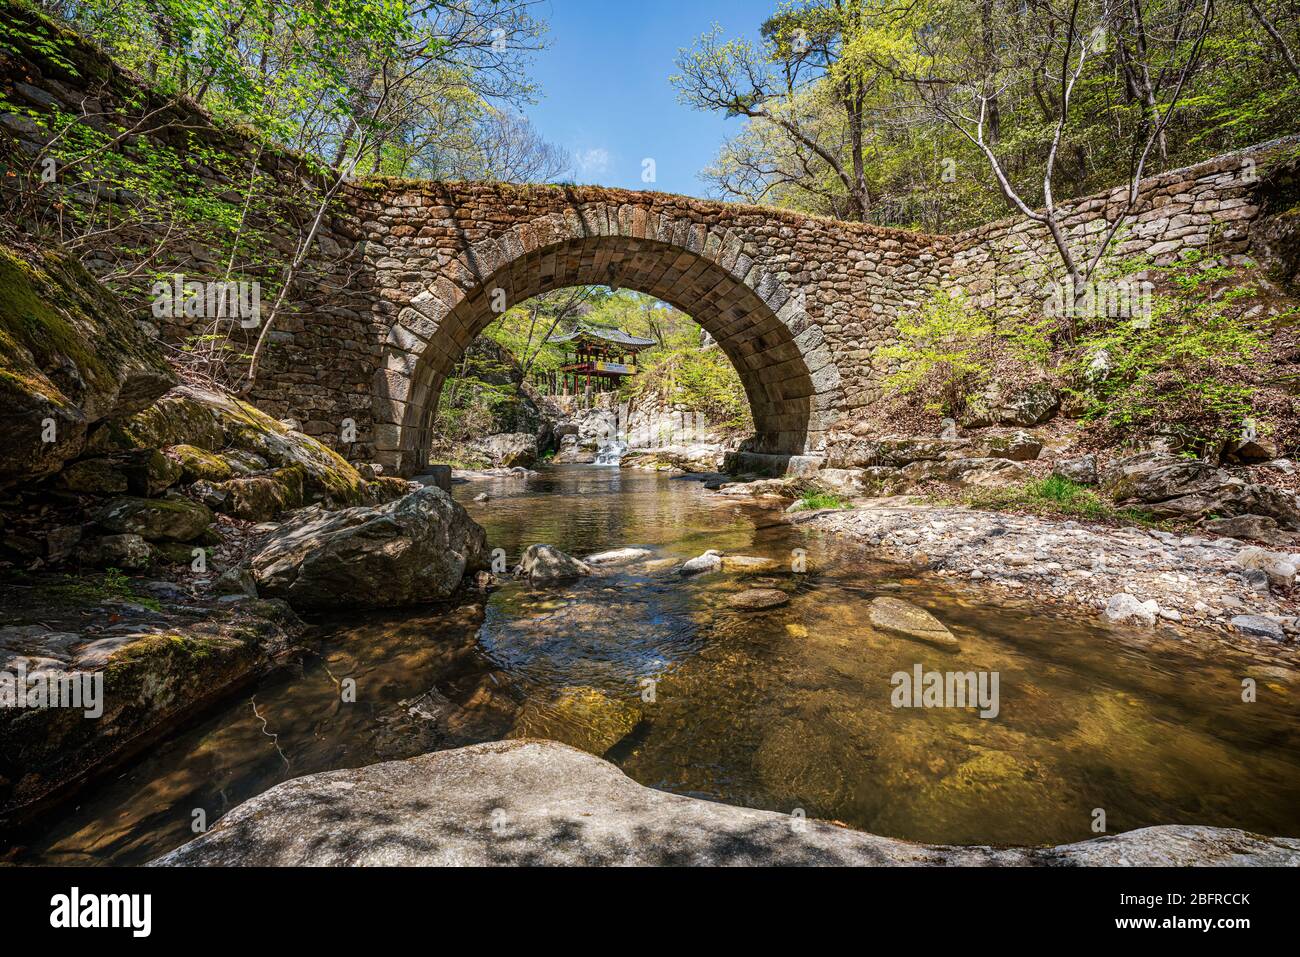 Jogyesan Provincial Park, Korea - 18 APRIL 2020: Seonamsa is famous for its beautiful spring blossoms, as well as its historic arched bridge Seungseon Stock Photo